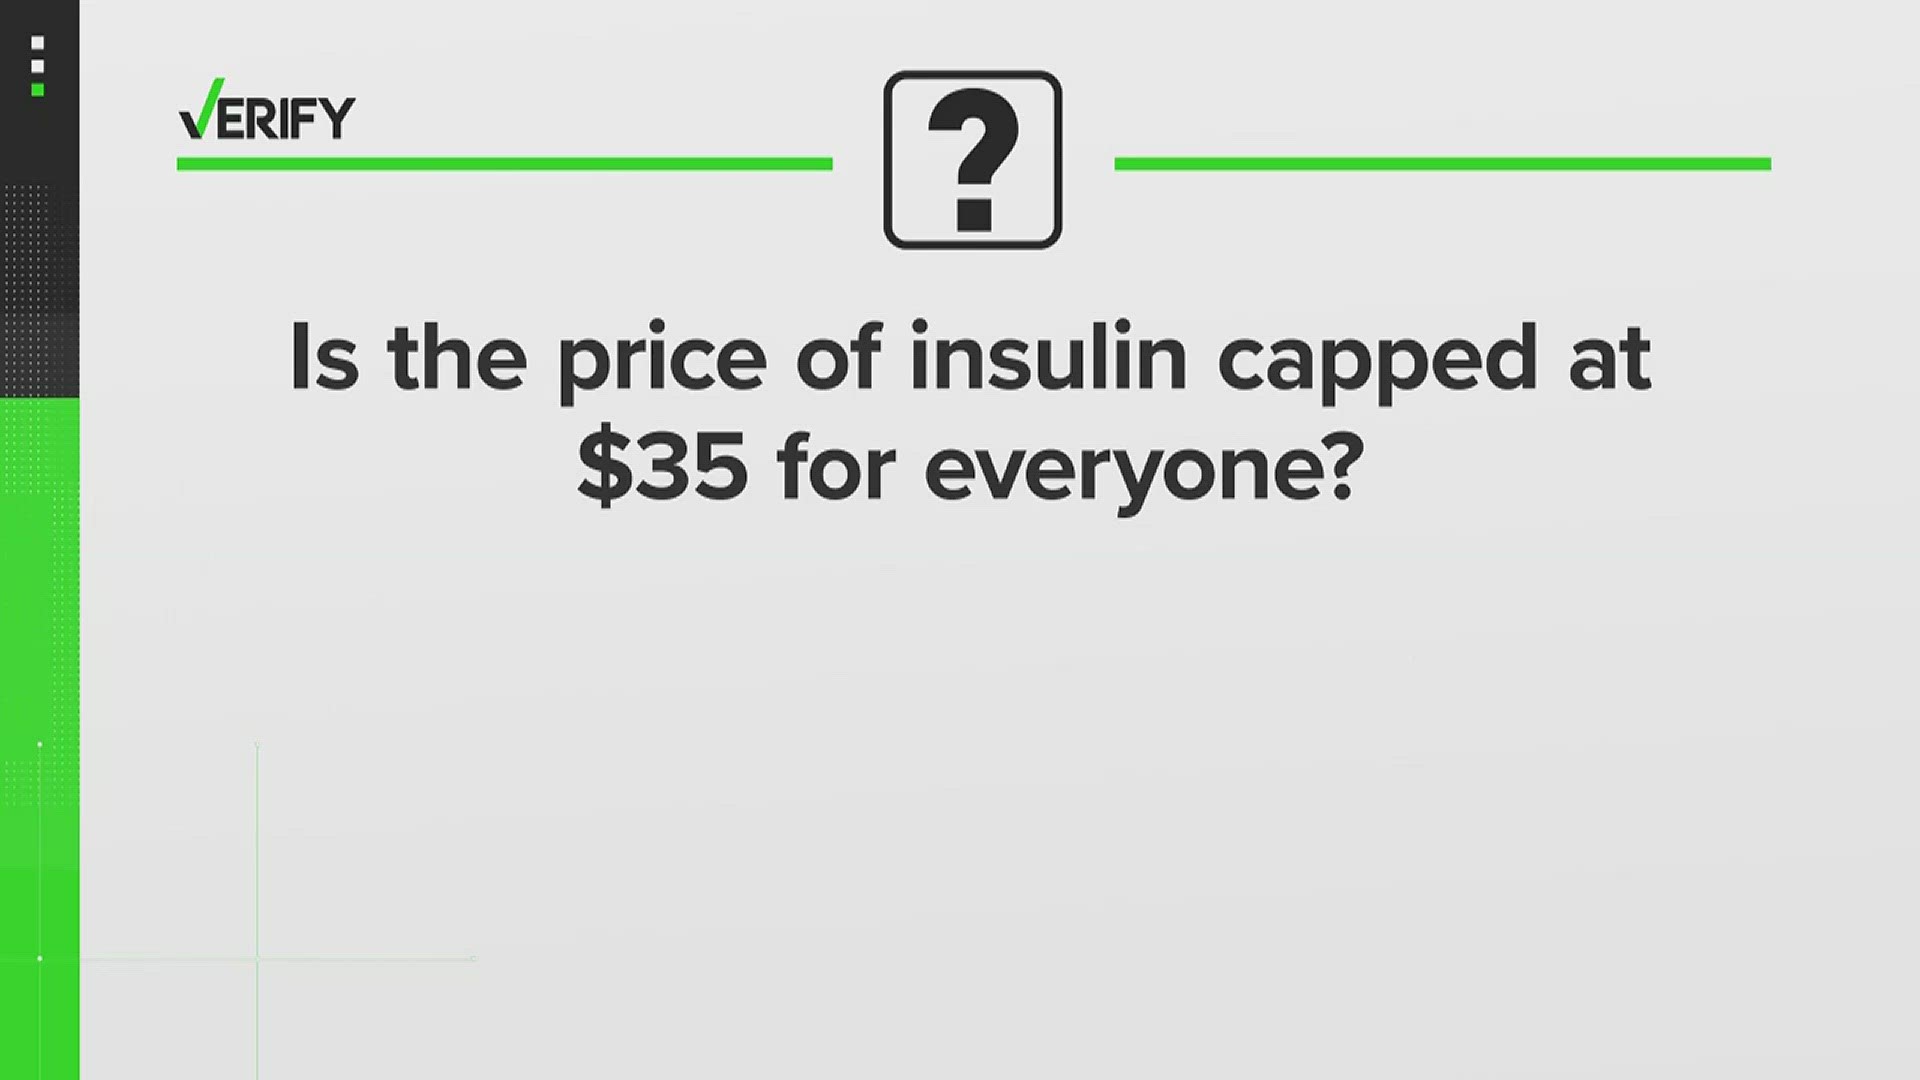 Earlier this month, under pressure from the Biden Administration, the nation's three largest insulin makers announced plans to cut their prices.